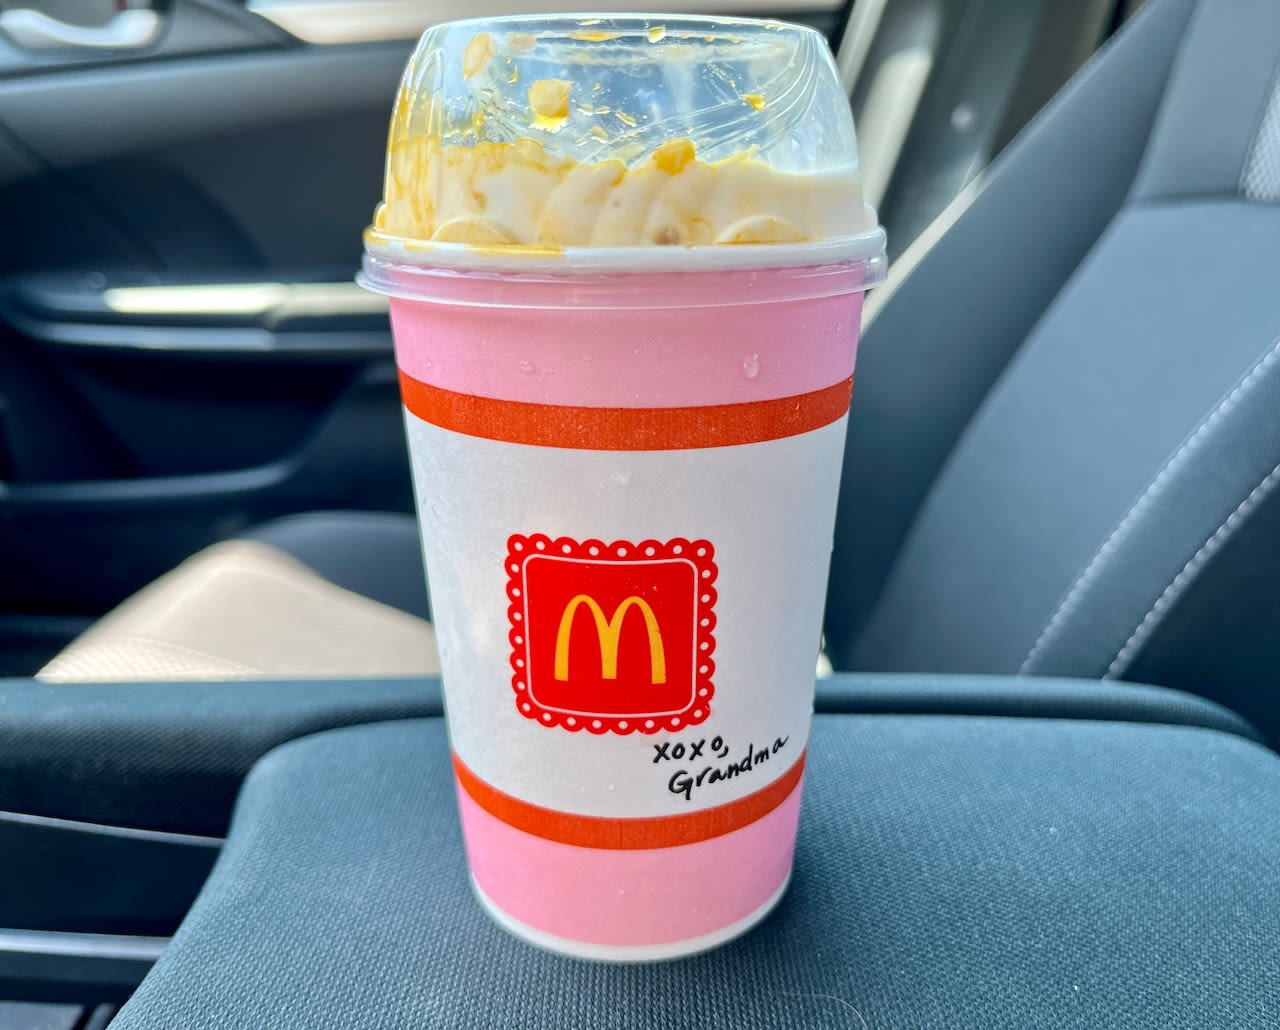 I tried McDonald’s grandma McFlurry so you don’t have to. Here’s my review.